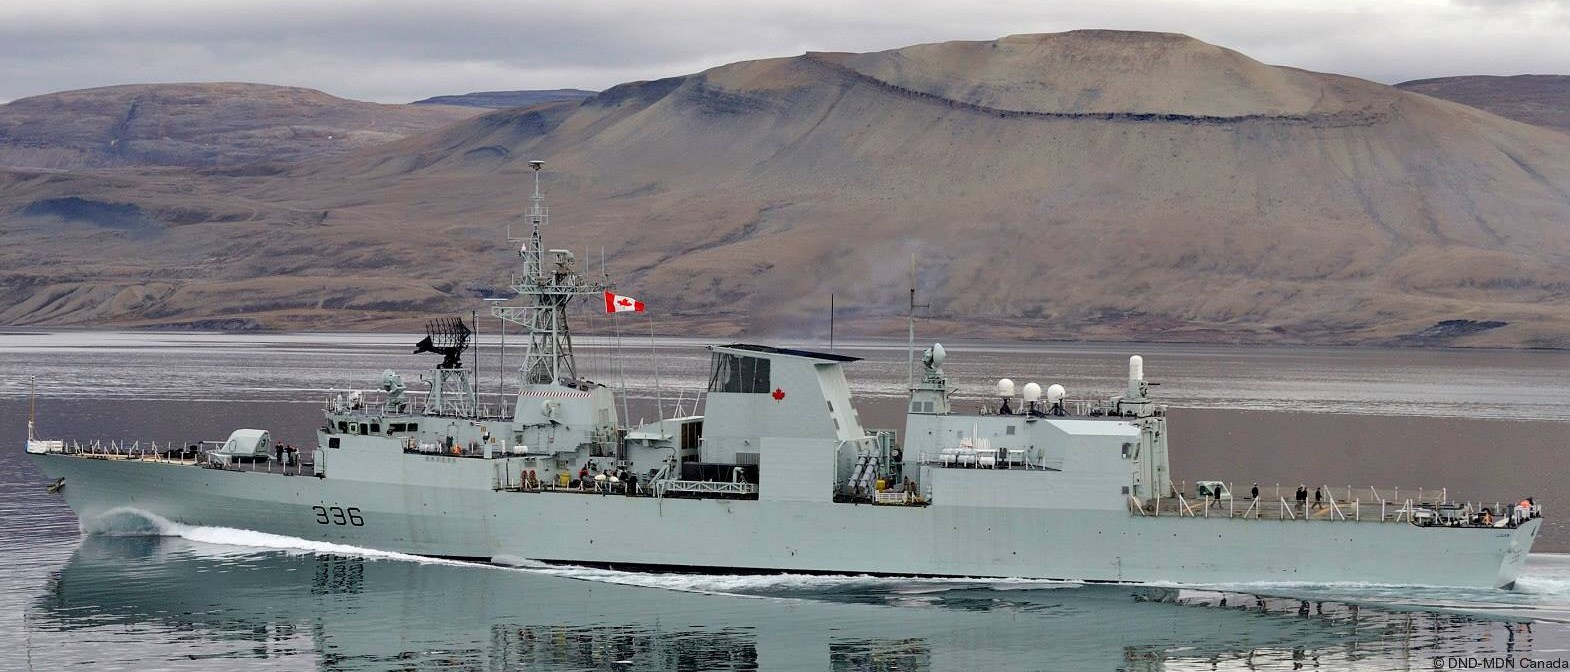 ffh-336 hmcs montreal halifax class helicopter patrol frigate ncsm royal canadian navy 24